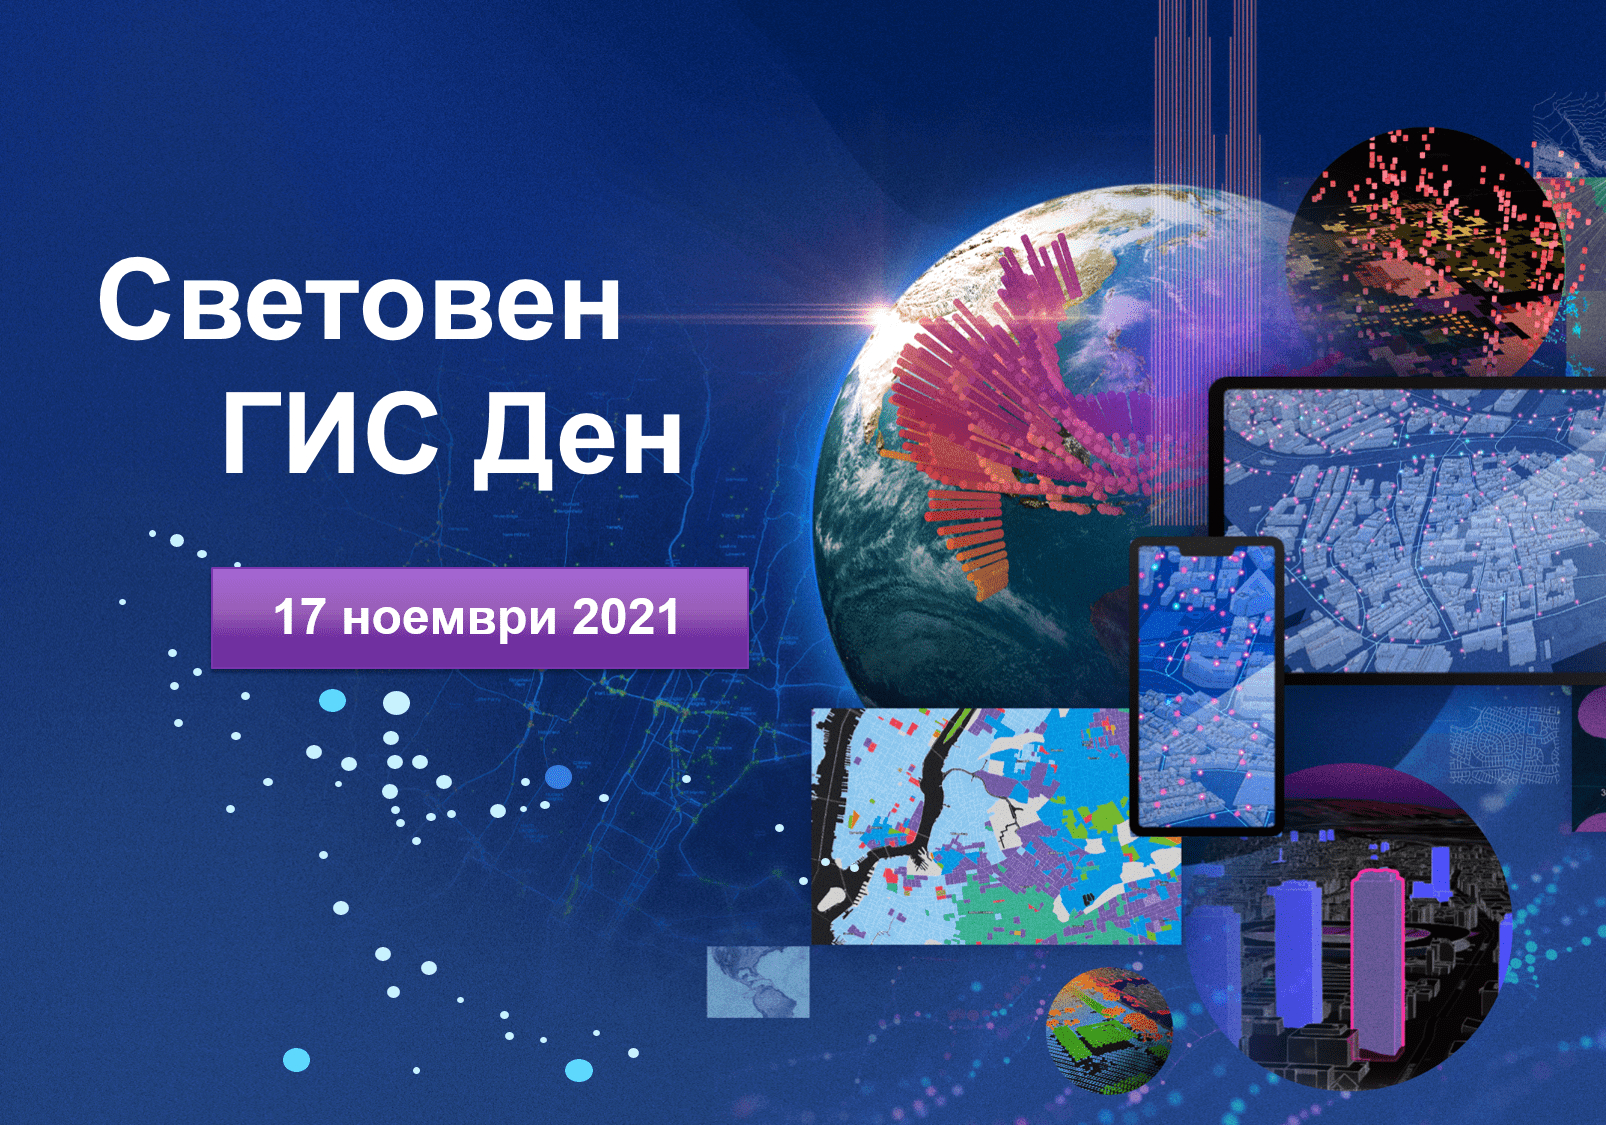 Bulgaria celebrates world GIS day with online conference on November 17